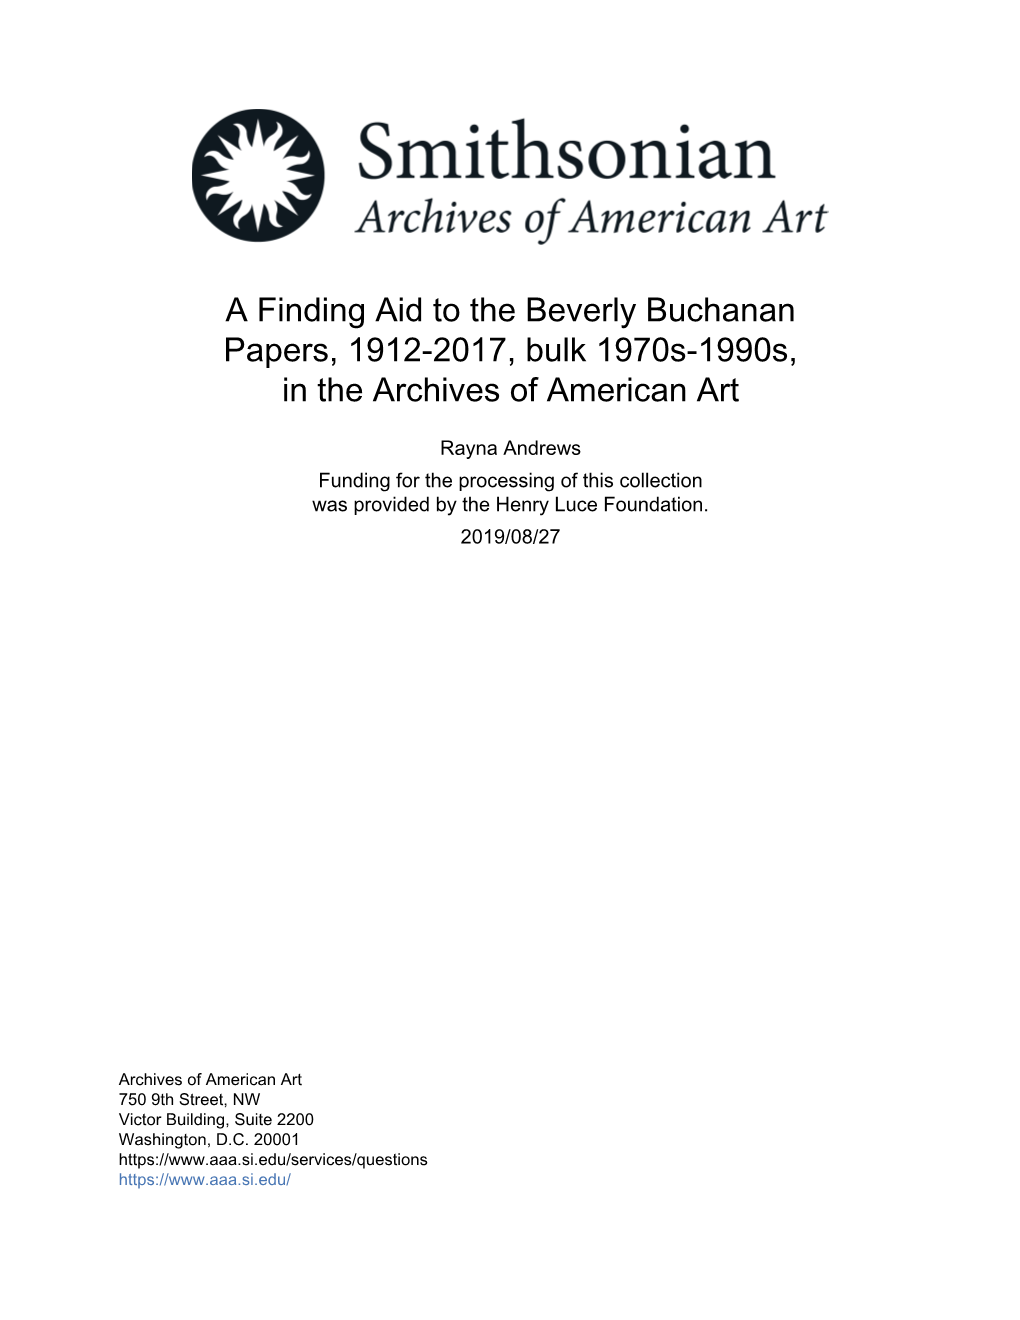 A Finding Aid to the Beverly Buchanan Papers, 1912-2017, Bulk 1970S-1990S, in the Archives of American Art